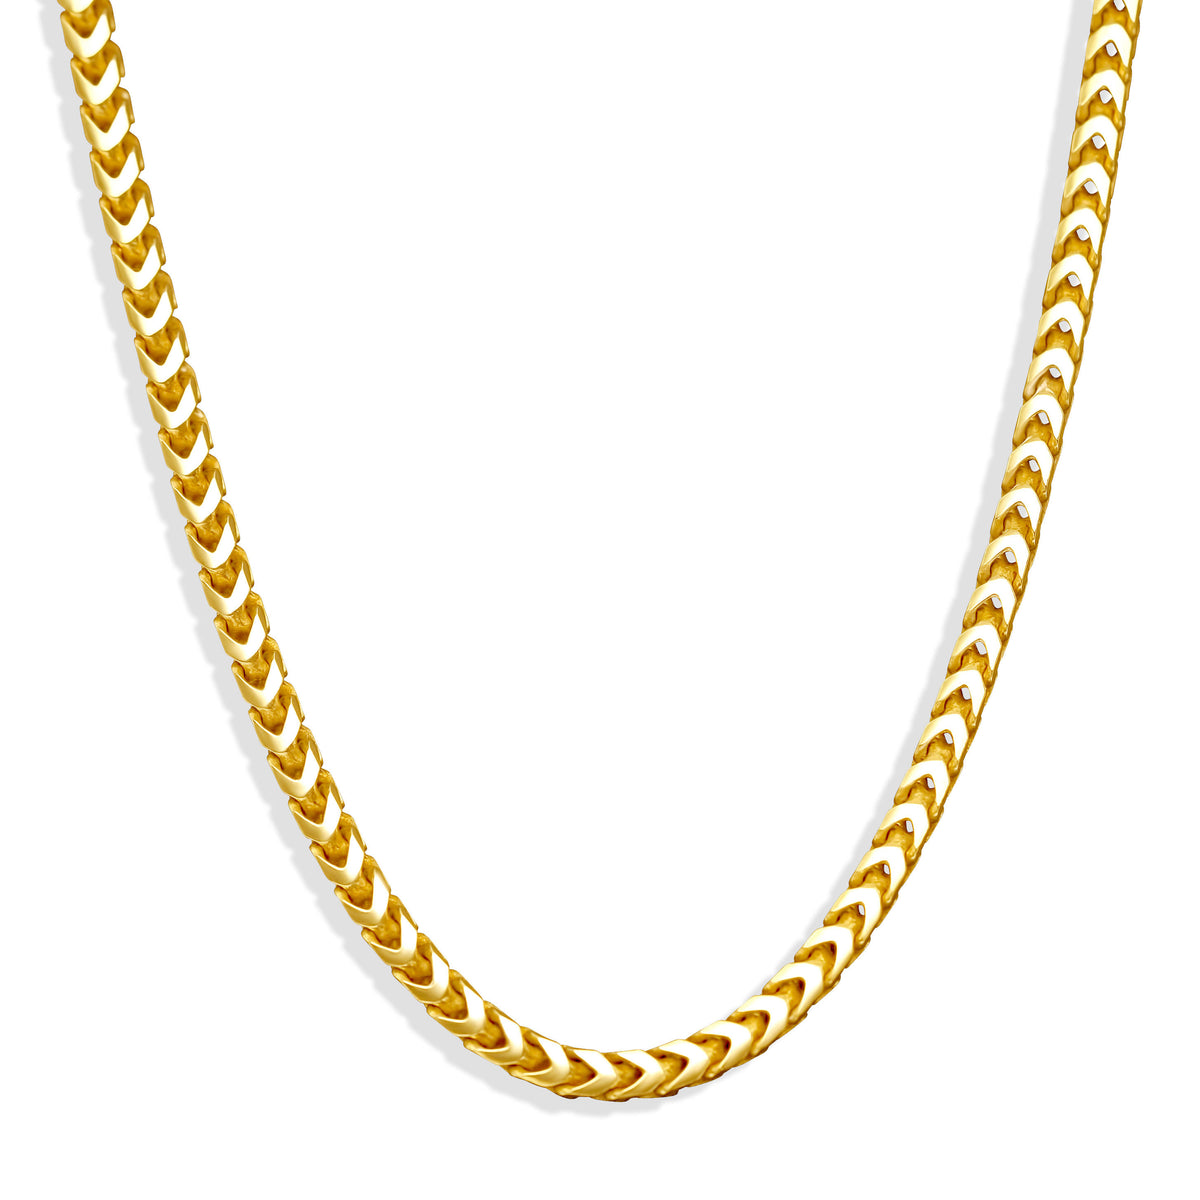 Franco Link Chain - 3mm